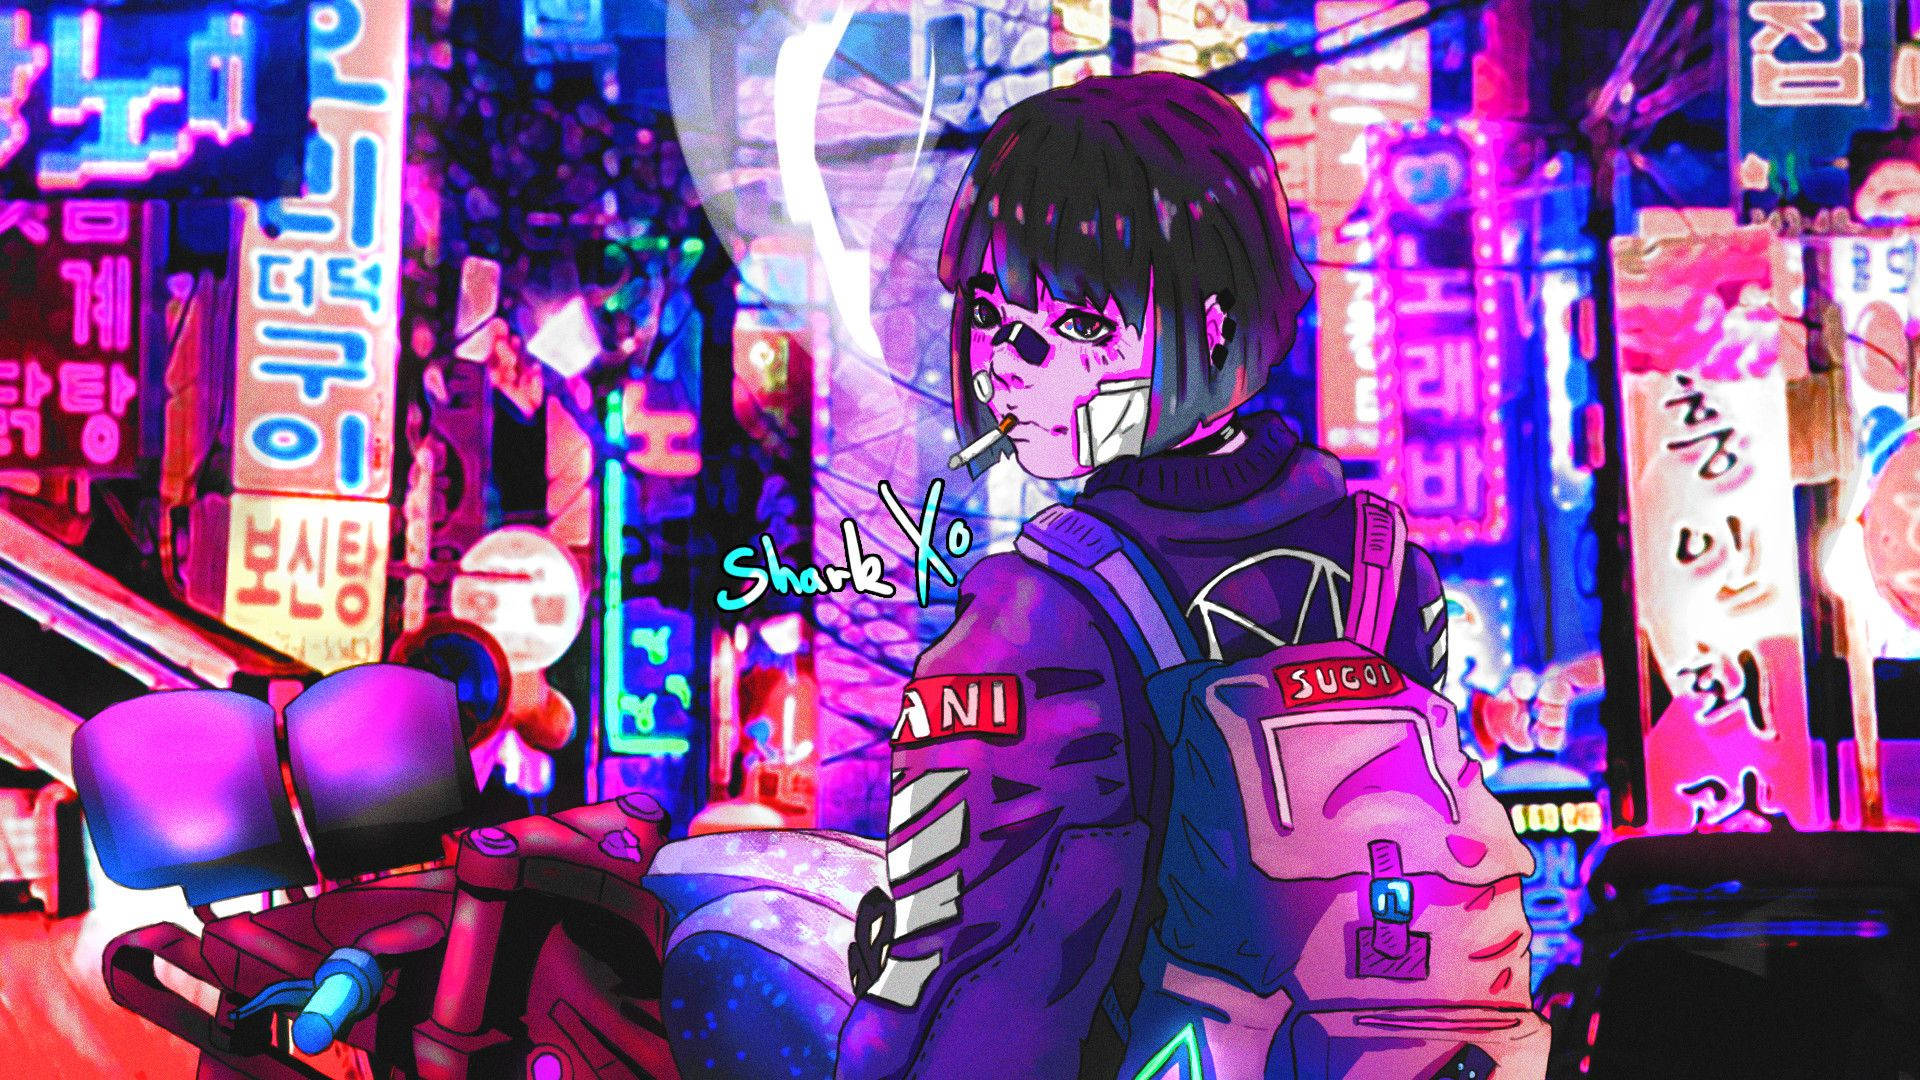 Aesthetic Pfp Girl And Neon Signages Background